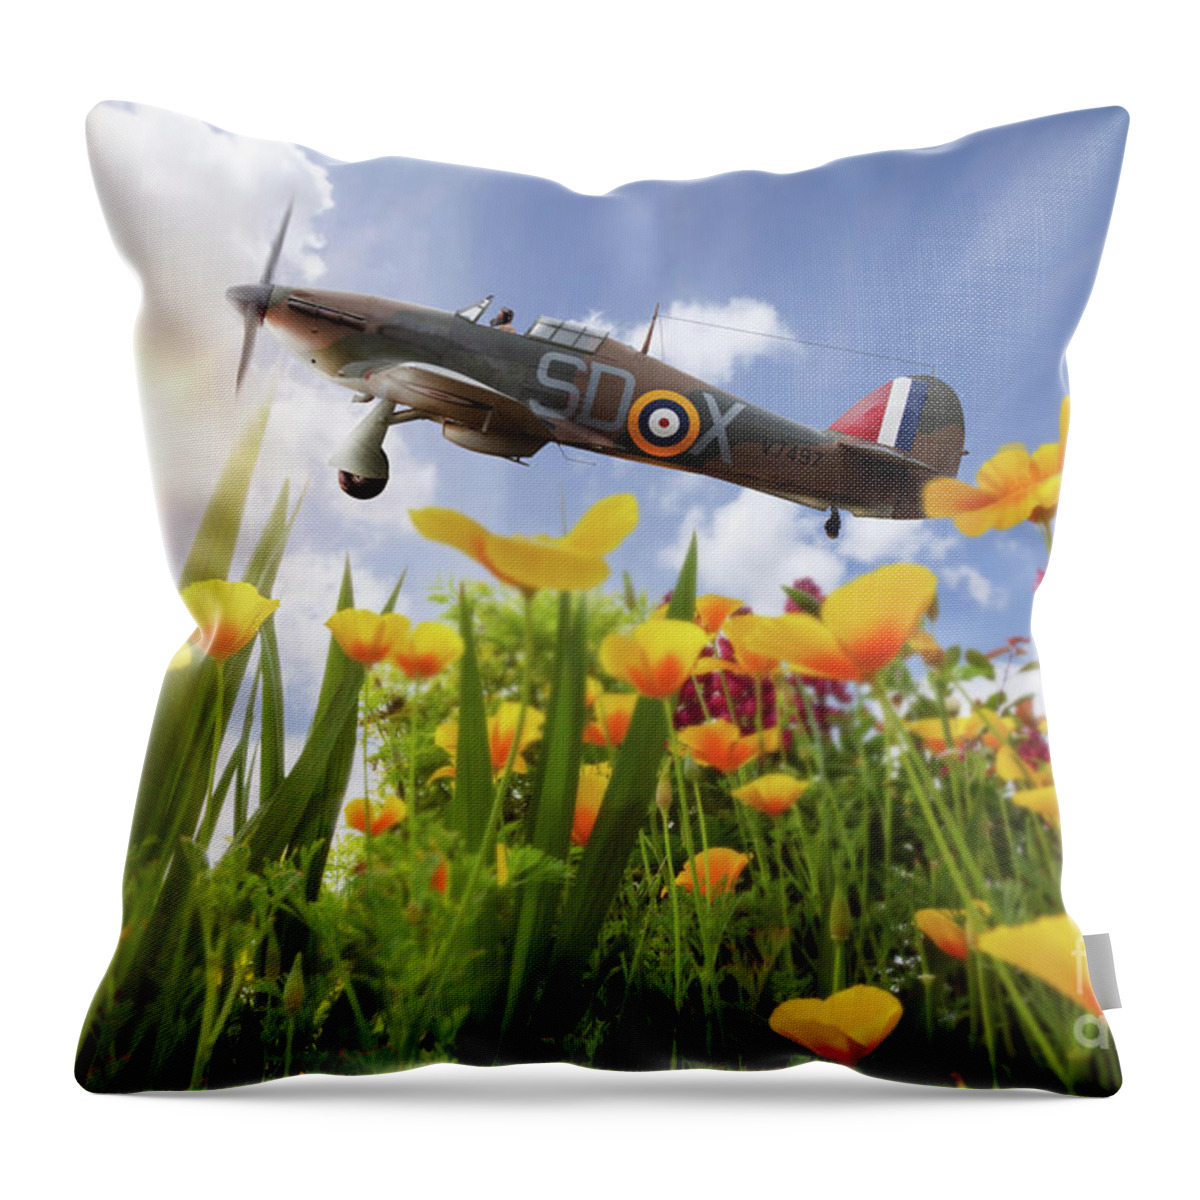 Hurricane; Raf; Sd-x; Hawker; Aeroplane; Poppies; Plane; Military; Aircraft; Airplane; Airshow; Battle Of Britain; British; Ww2; Canopy; Closeup; Clouds; Combat; Poppy; England; Fighter; Flowers; Flying; Historic; Iconic; Landscape; Mk1; Pilot; Retro; Remembrance; Mark1 Throw Pillow featuring the photograph Hawker Hurricane flying over poppies in spring by Simon Bratt